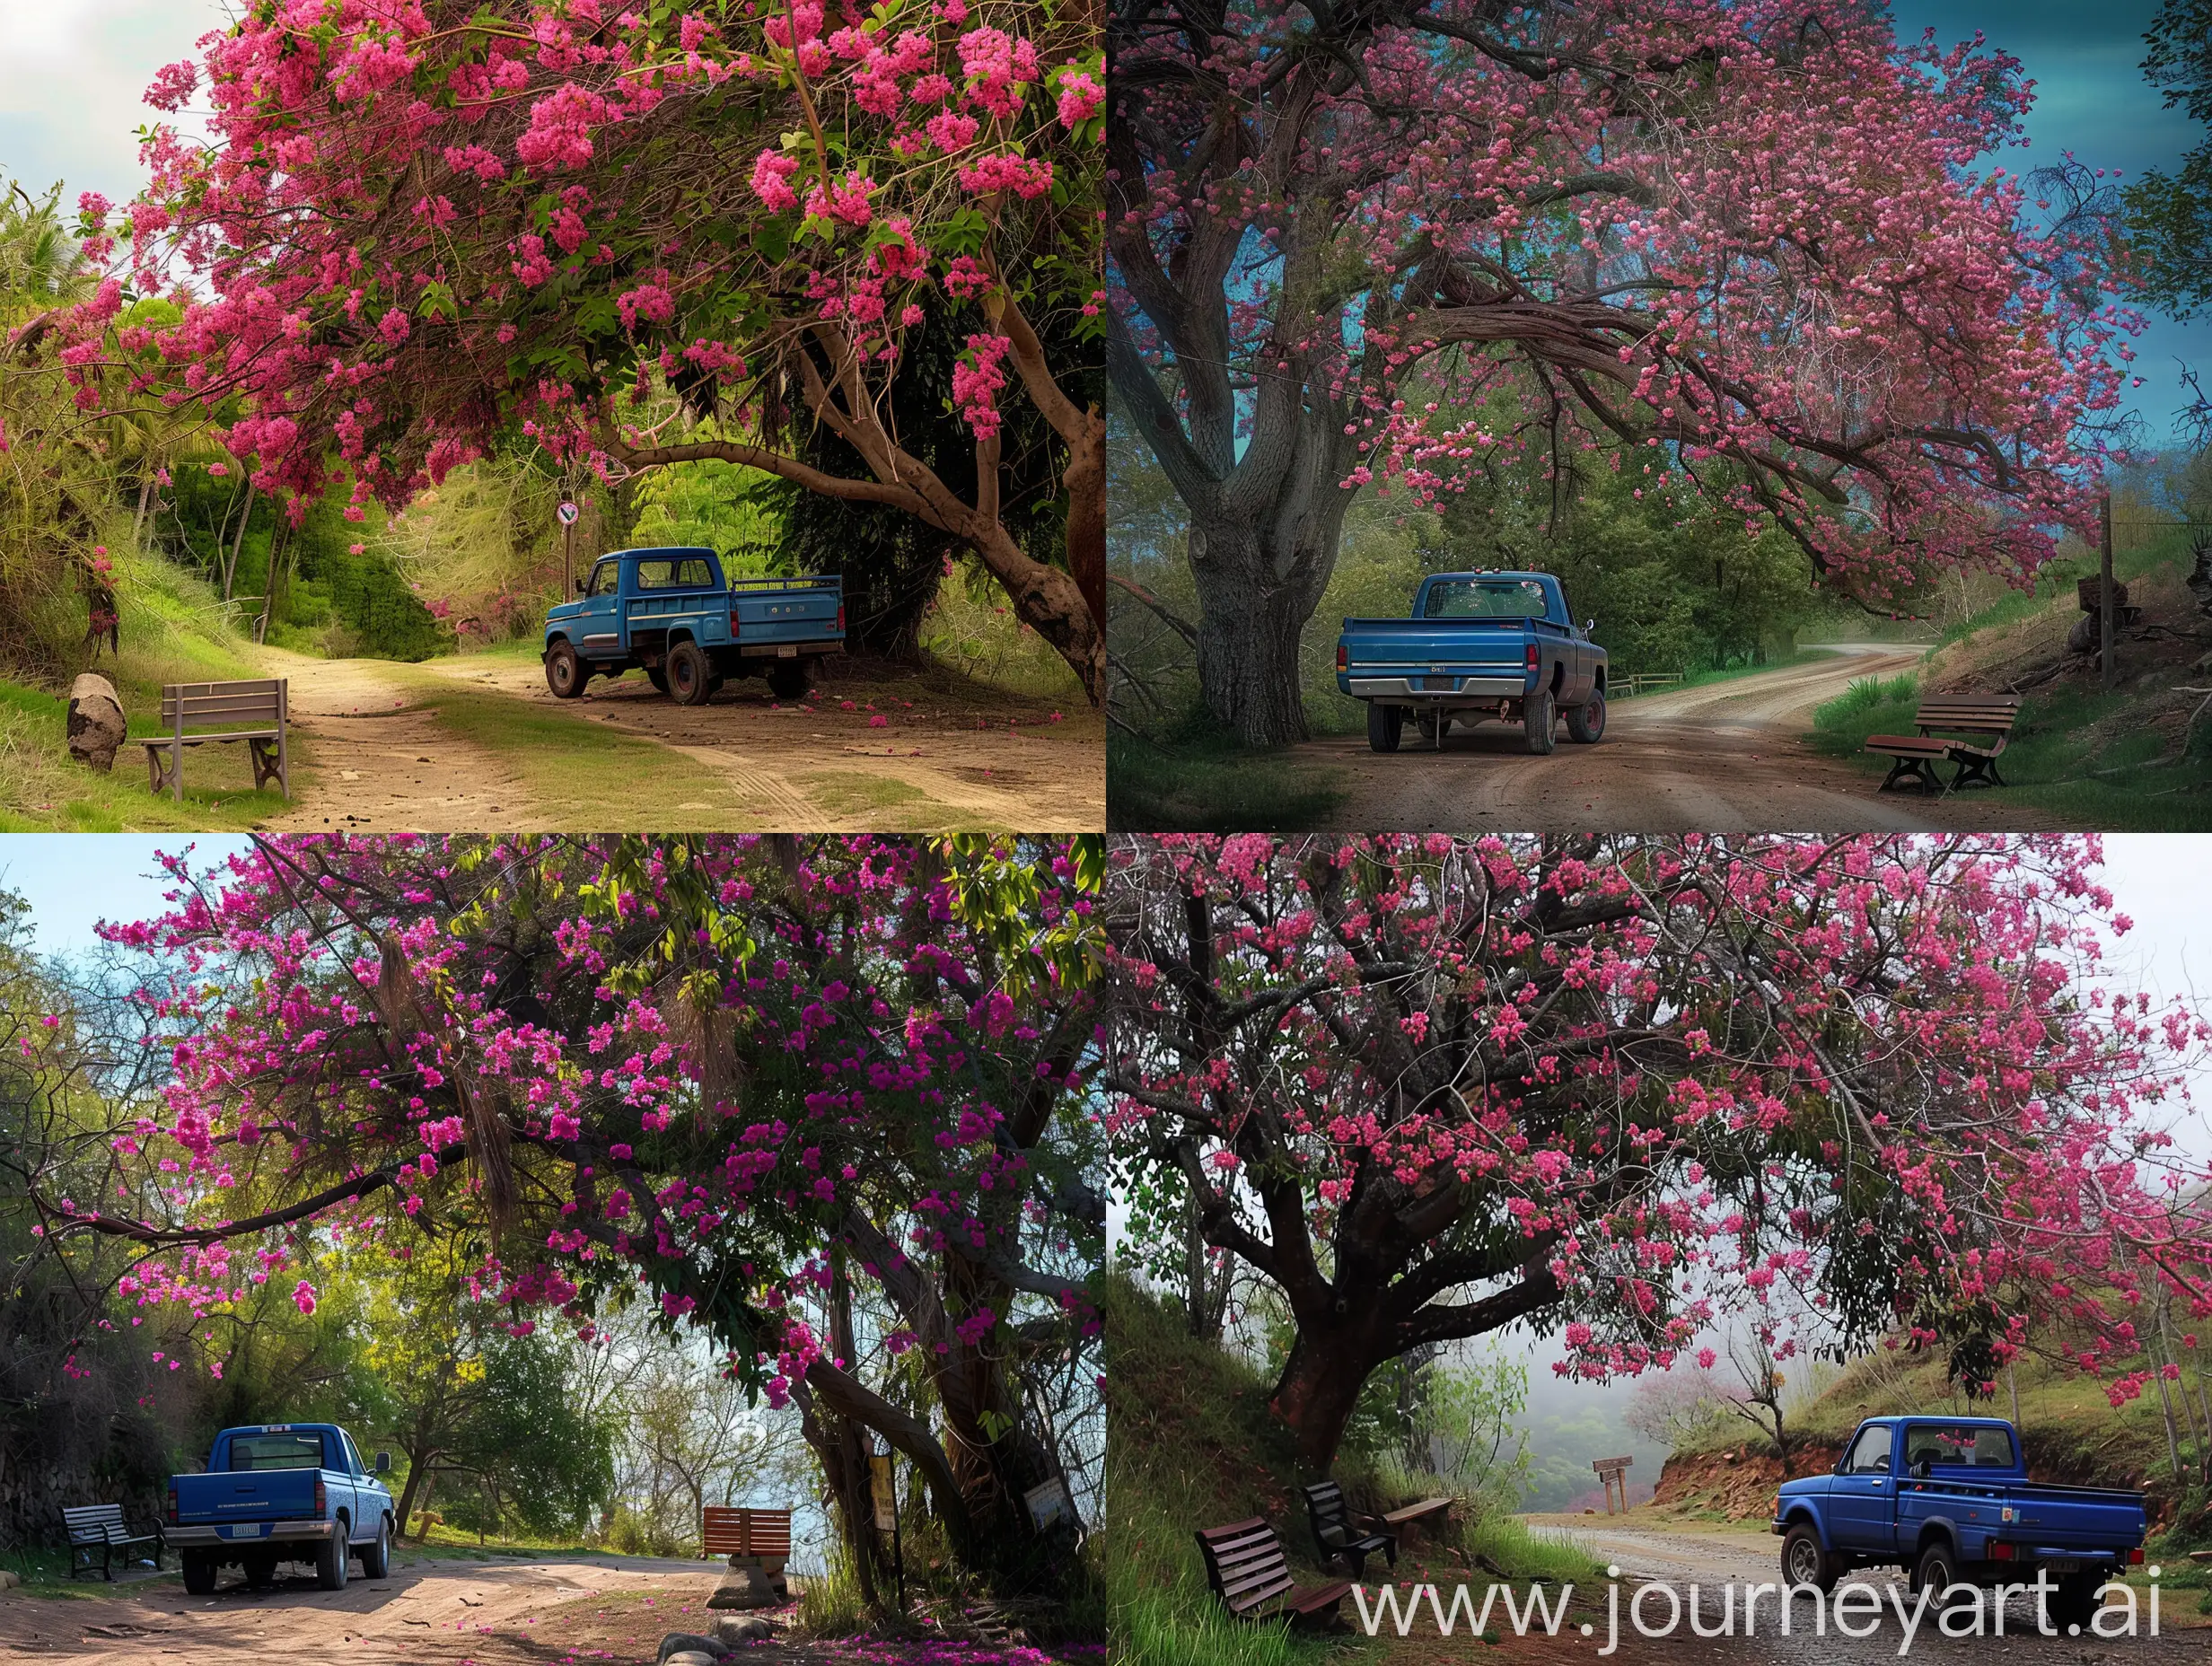 A blue truck is parked on a dirt road under a tree with pink flowers, and there's a bench nearby.